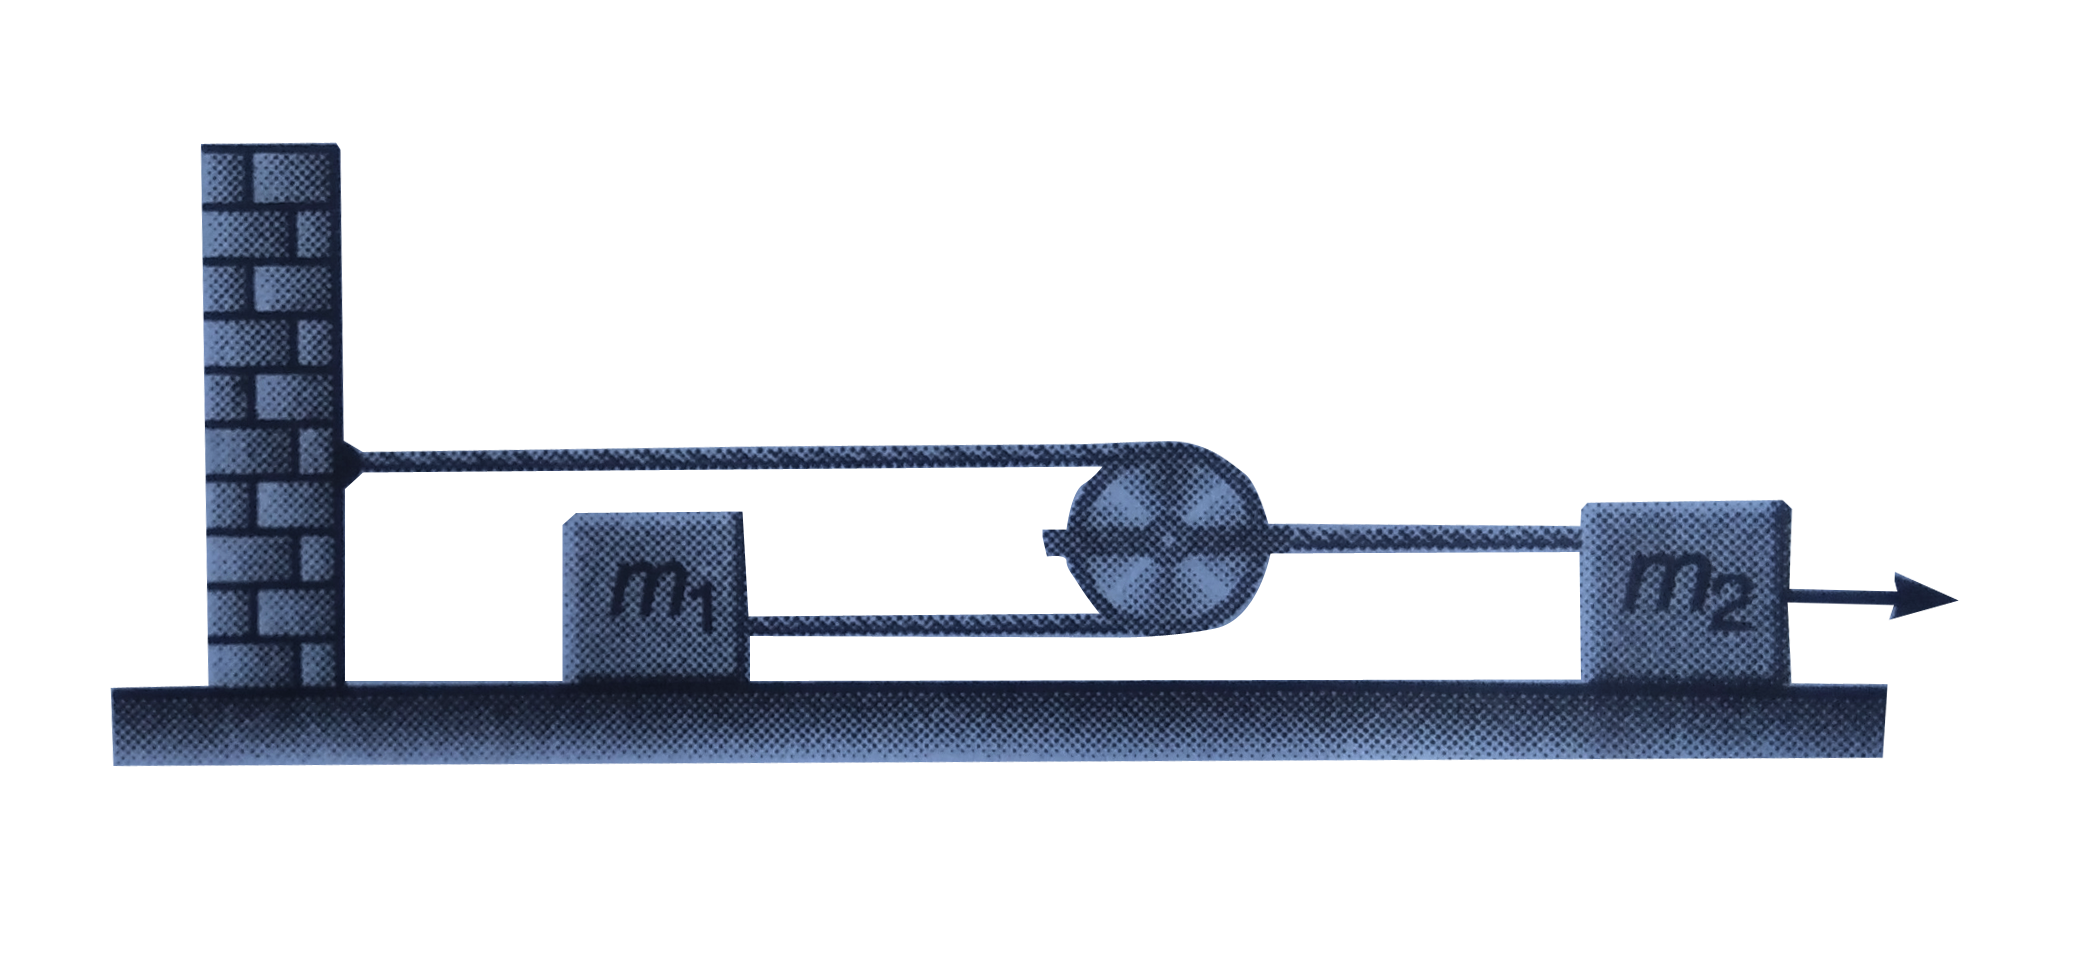 In figure assume that there is nagligible friction between the blocks and table. Compute the tension in the cord connecting m2 and the pulley and acceleration of m2if m1 = 300 g,  m2 = 200 g and F = 0.40N